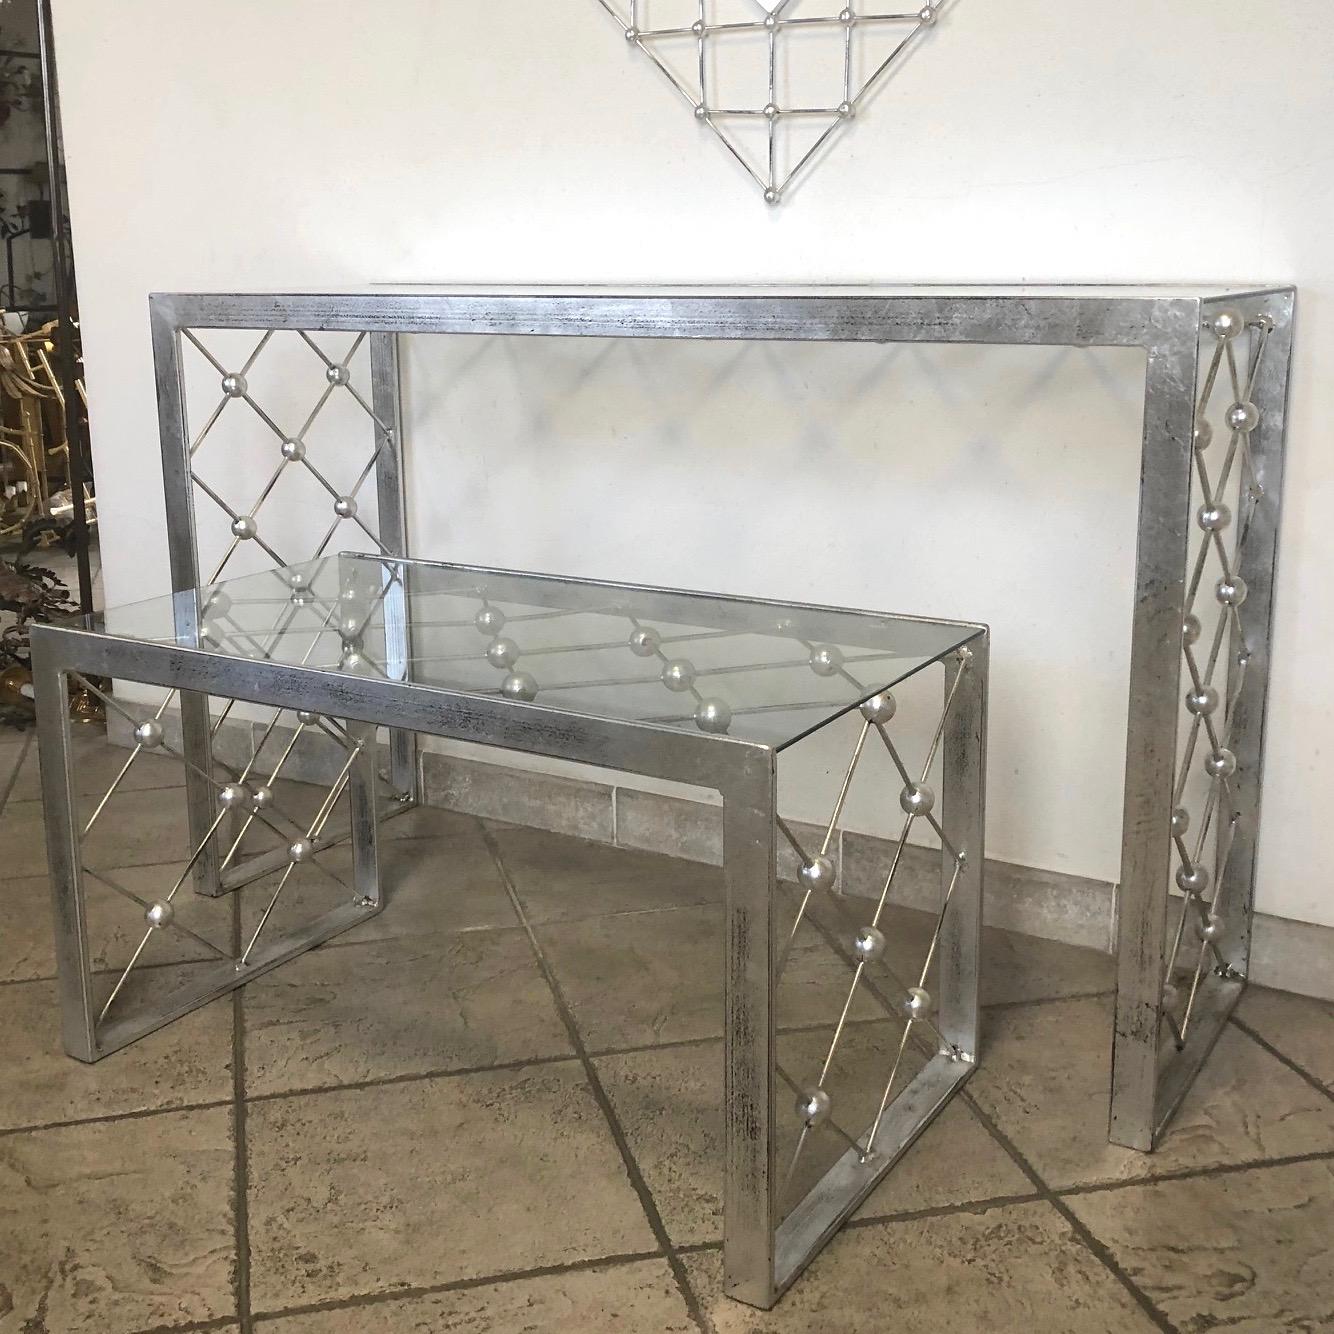 Italian Modern Industrial Design Criss Cross Fretwork Iron Console / Entry Table For Sale 3